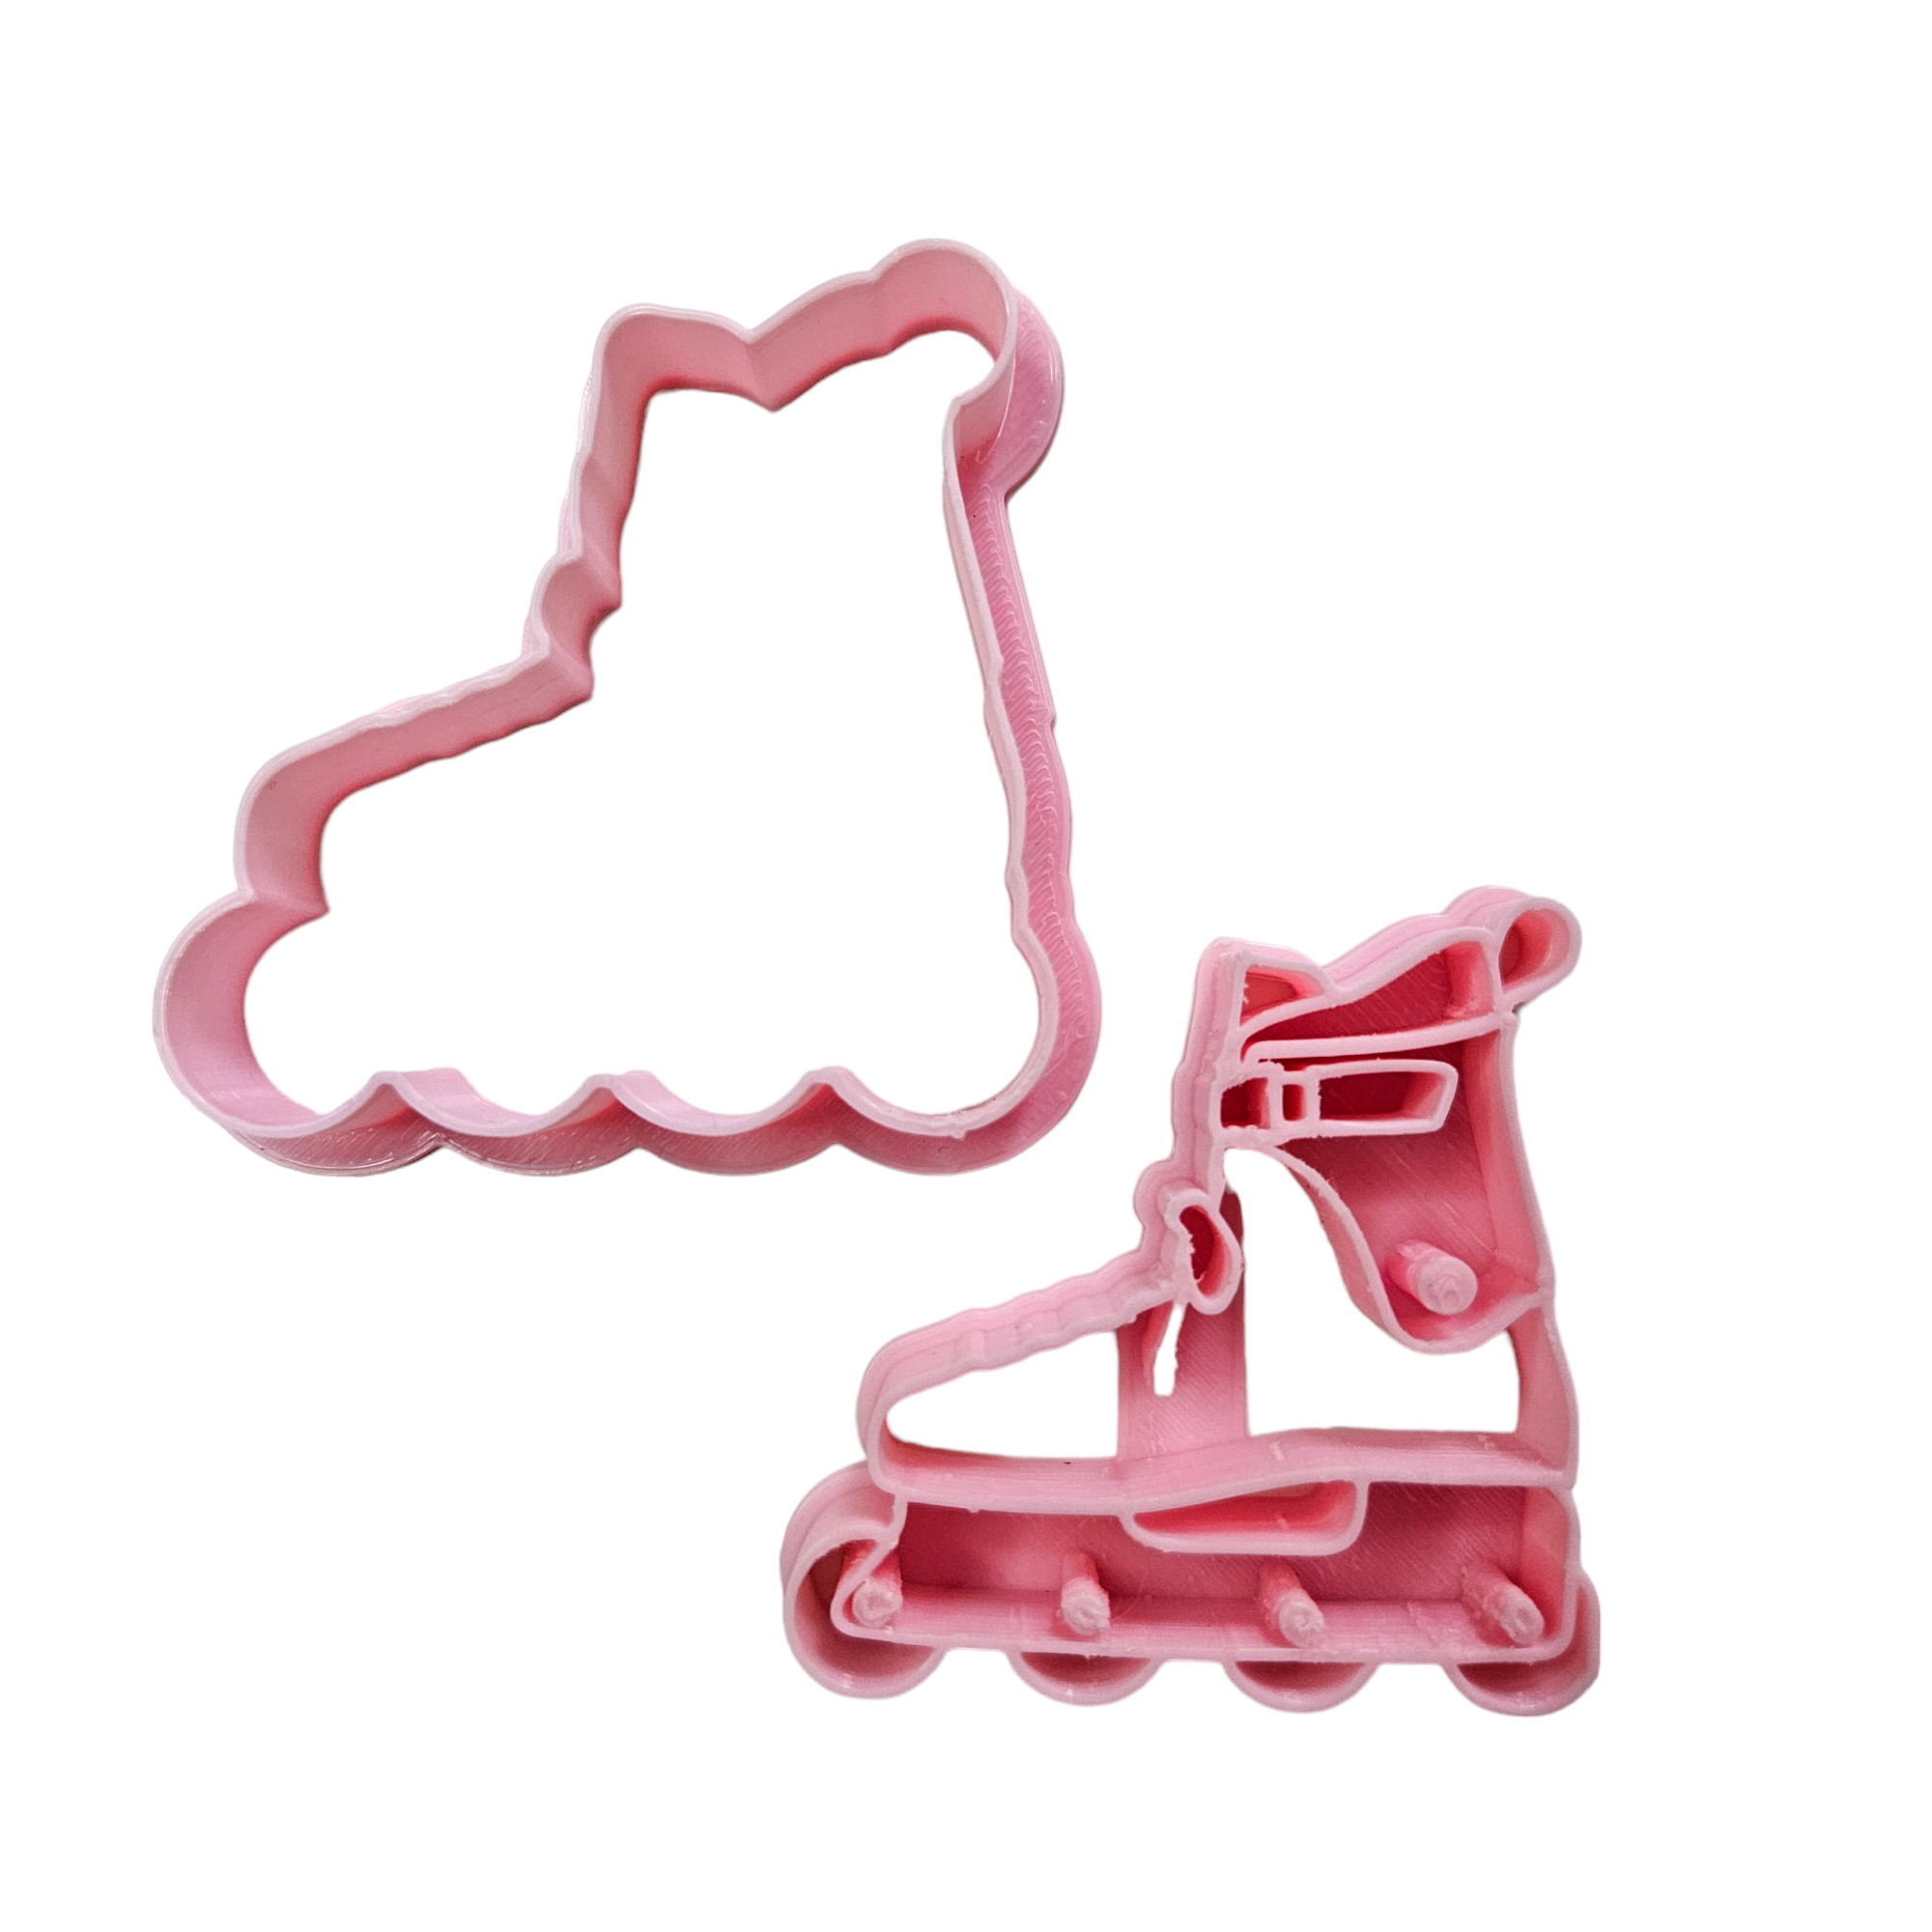 Barbie Doll Logos - Cookie Cutter Stamp 2-Pc. Set